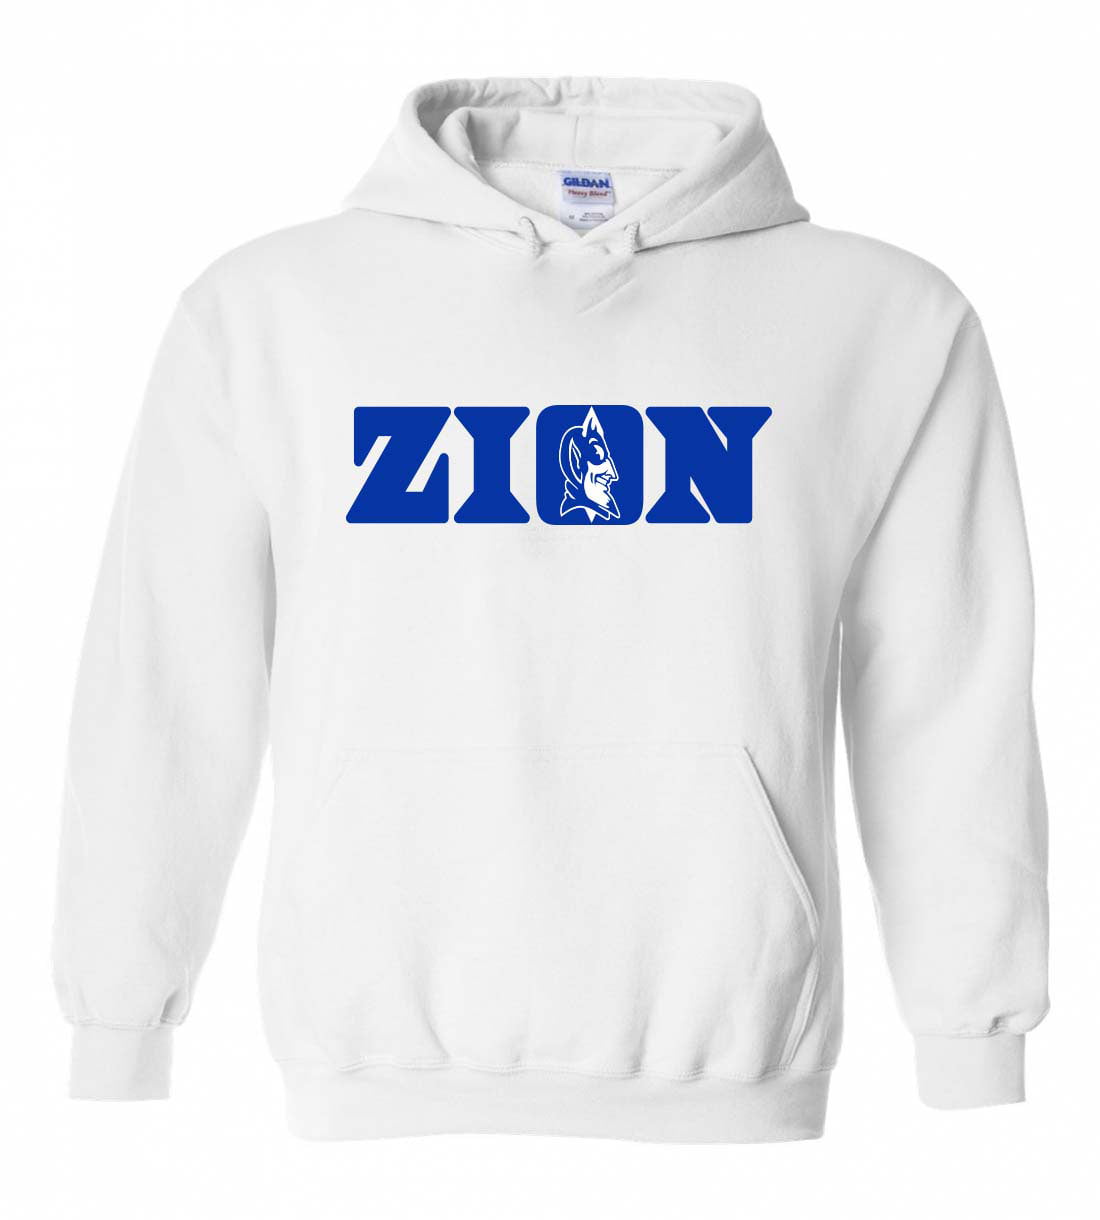 Go All Out Youth Zion Crewneck Sweatshirt 